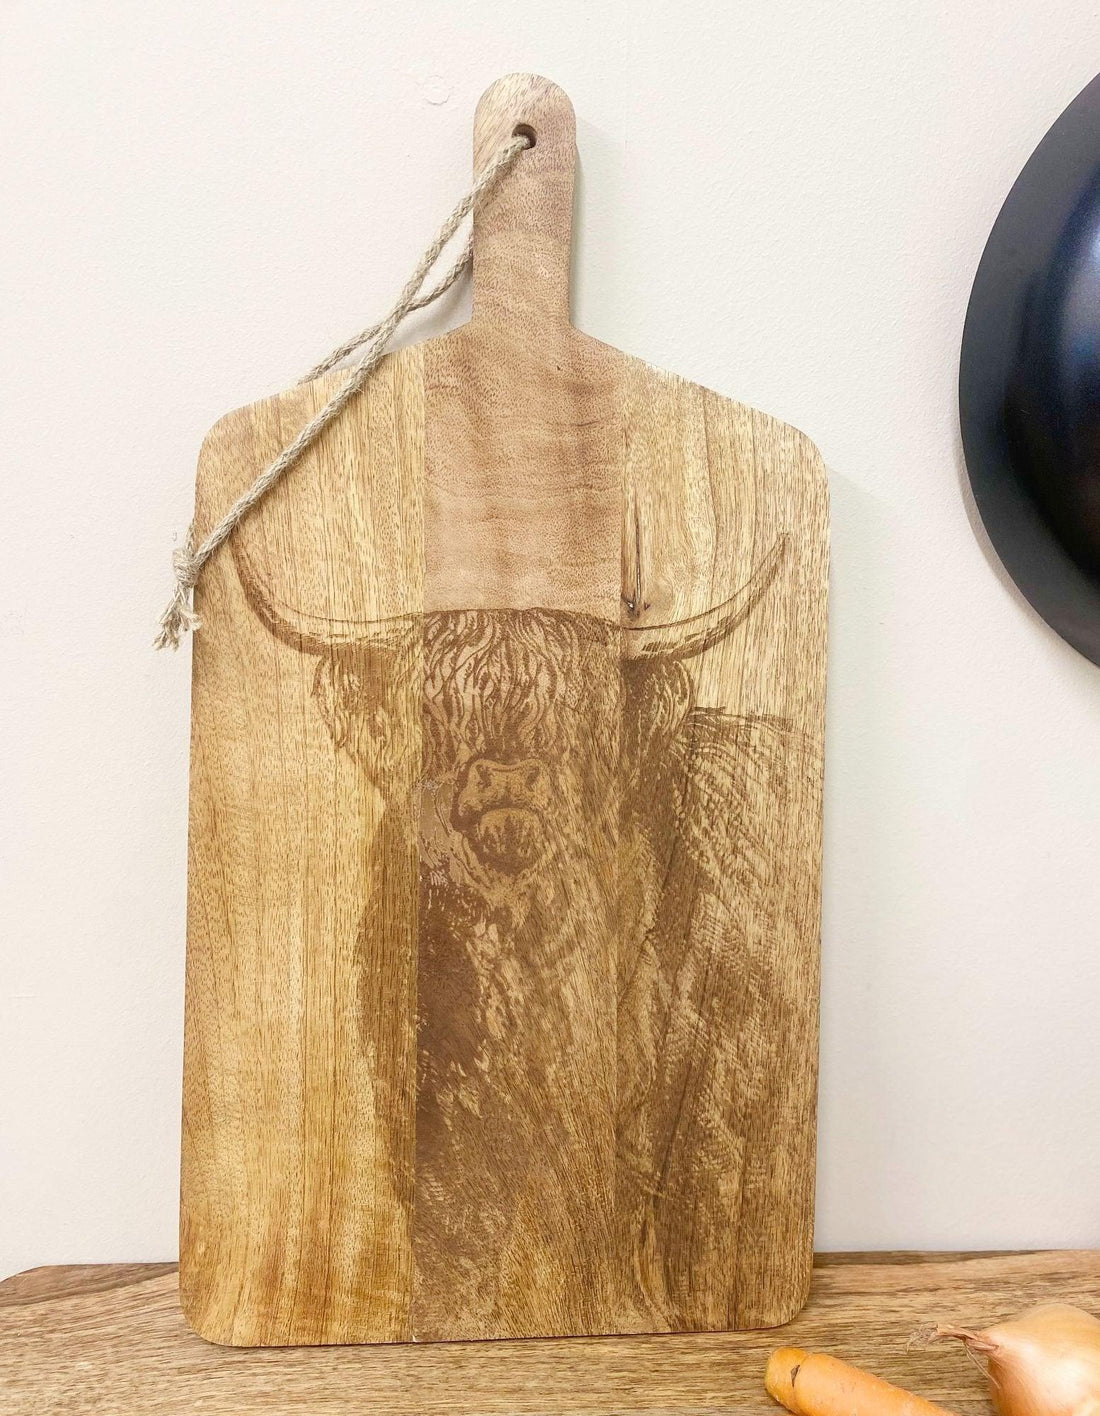 Wooden Chopping Board With Highland Cow Engraving 50cm - £33.99 - Trays & Chopping Boards 